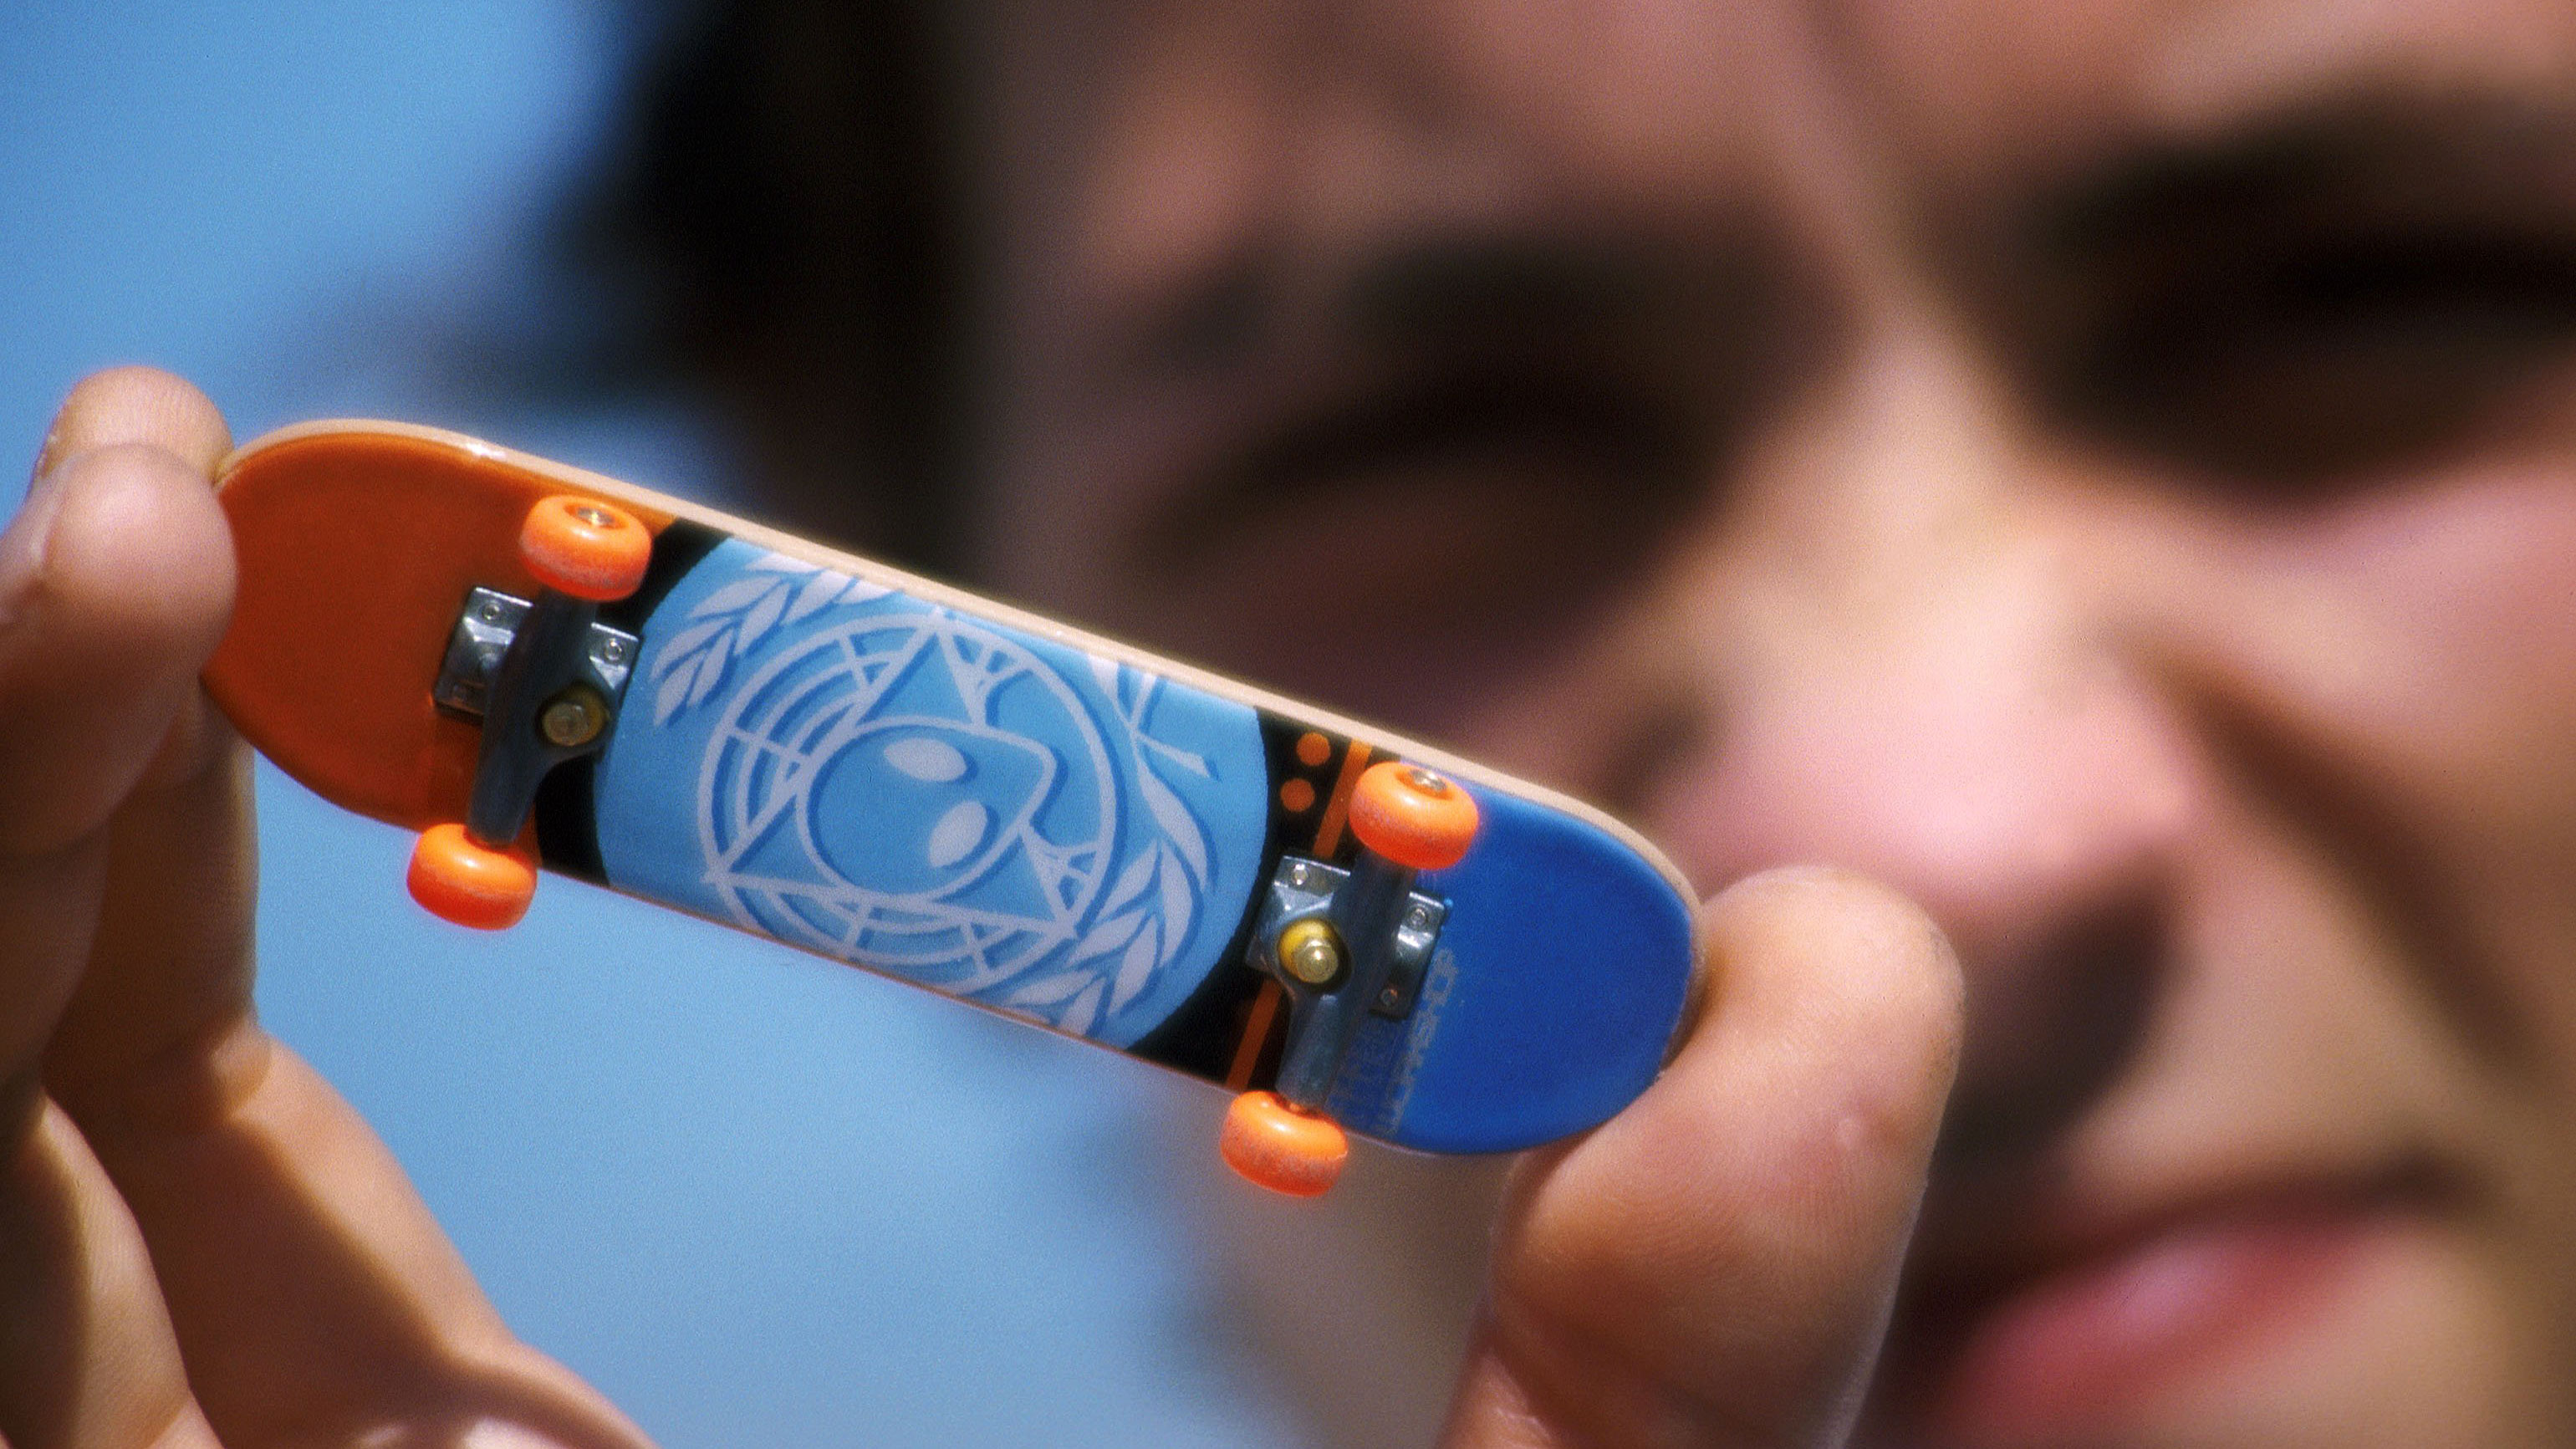 Tony Hawk partners with Hot Wheels for new finger skateboard toy line